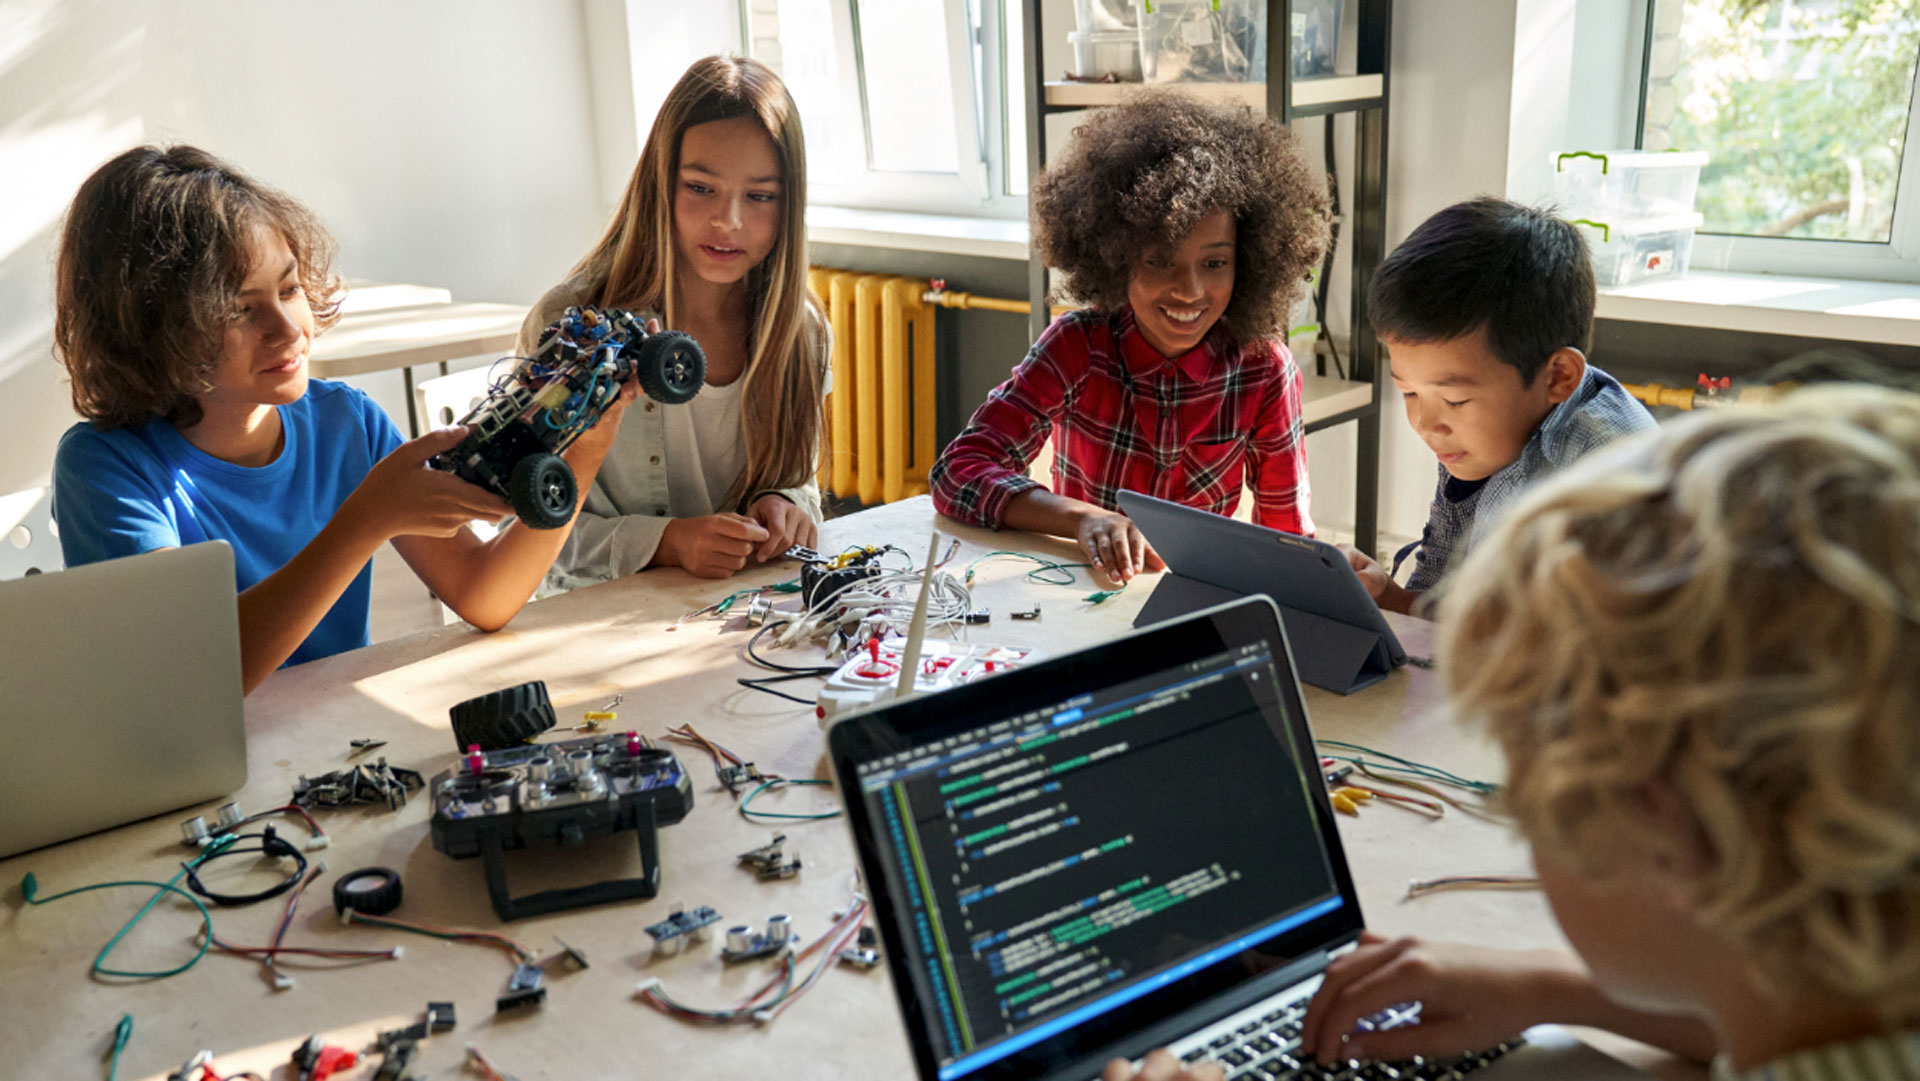 Getting Started with Coding in the Classroom